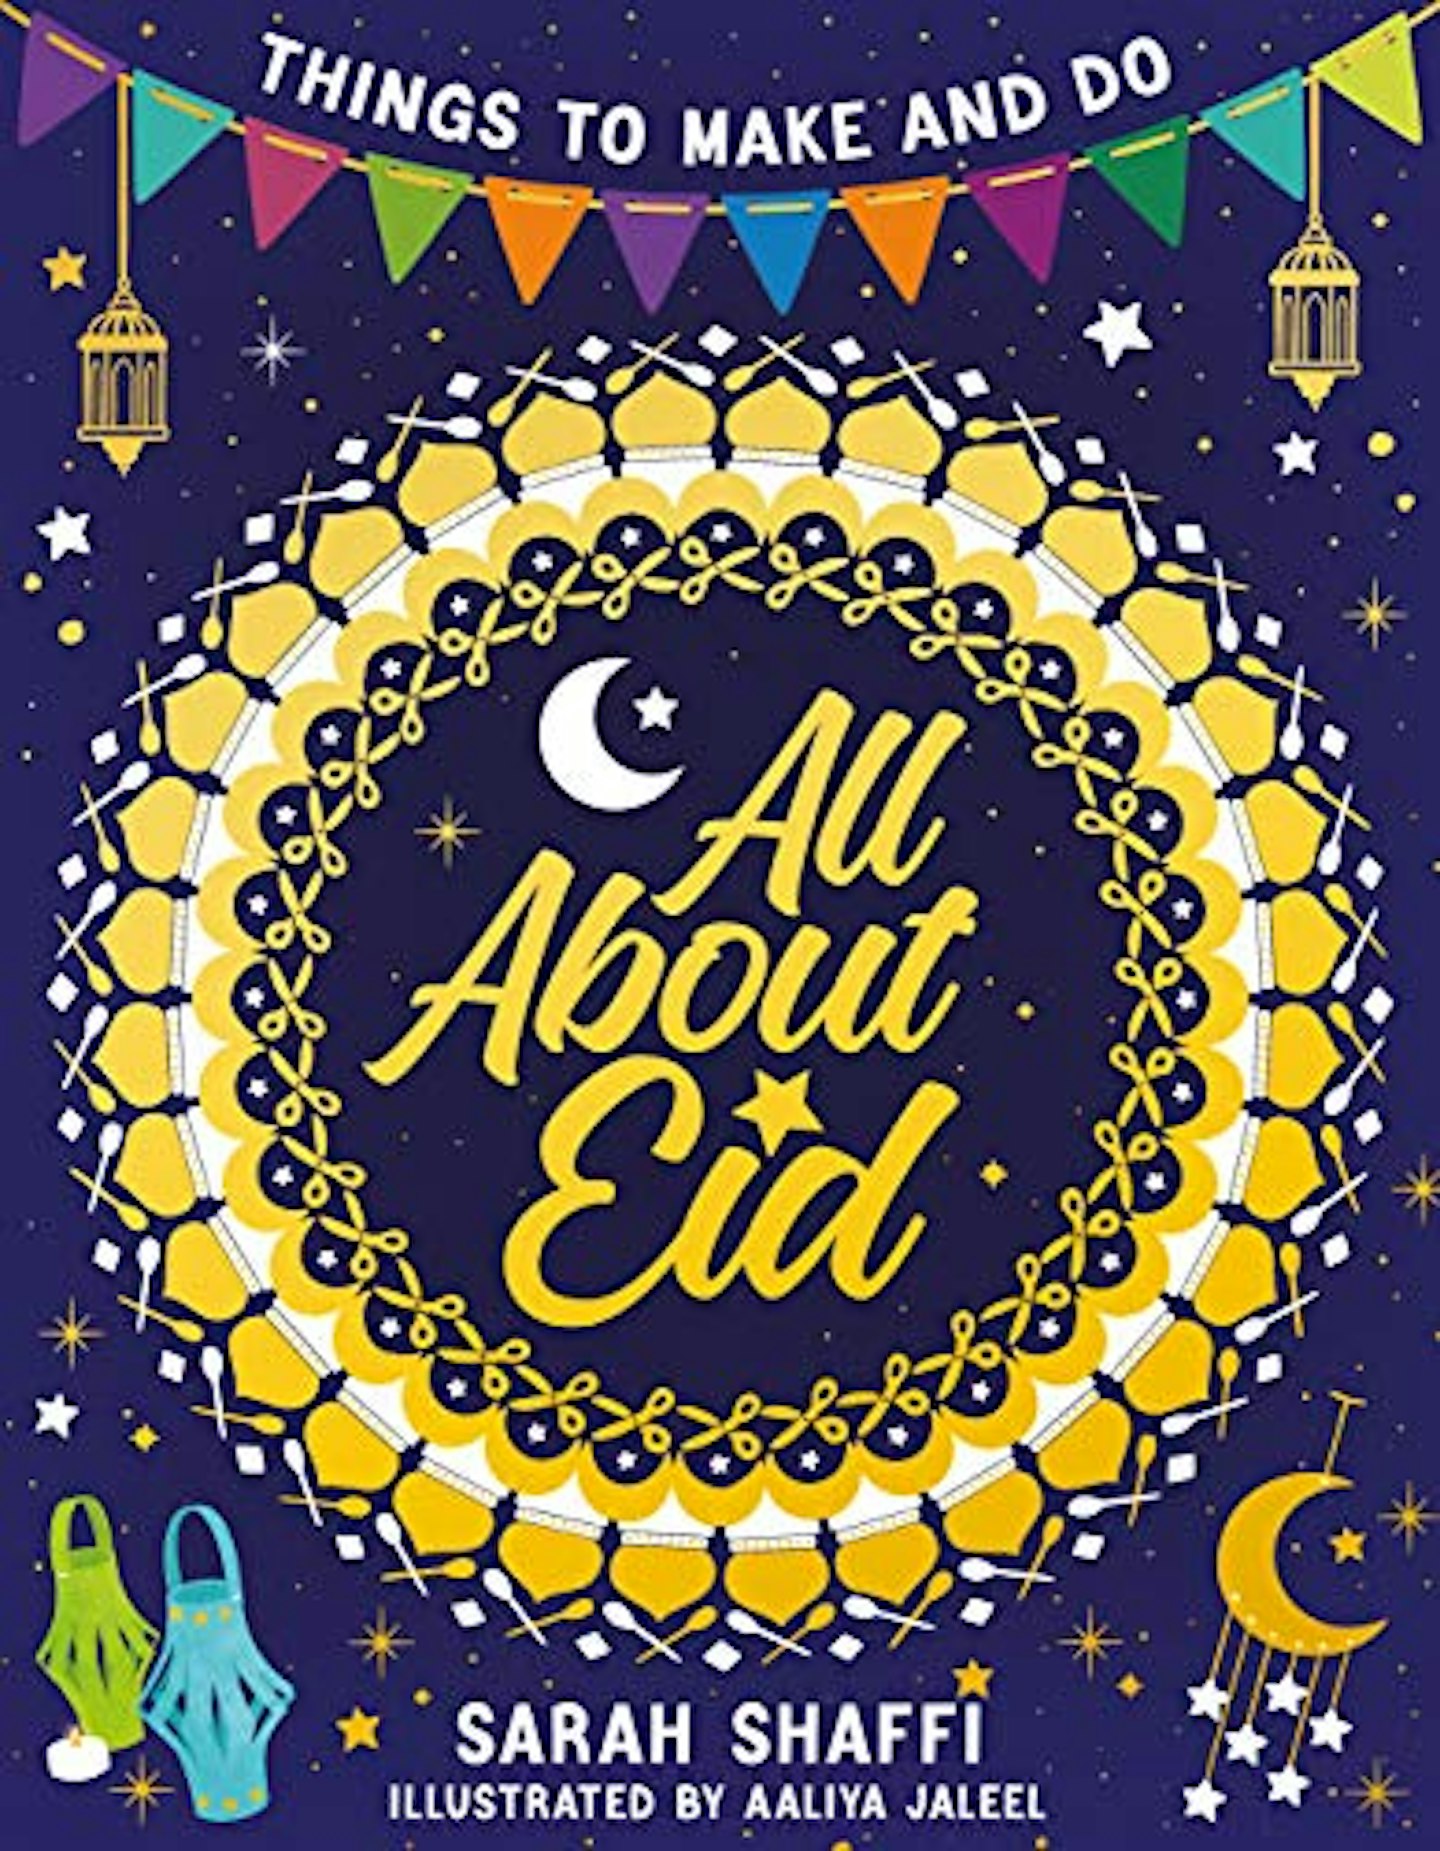 All About Eid by Sarah Shaffi